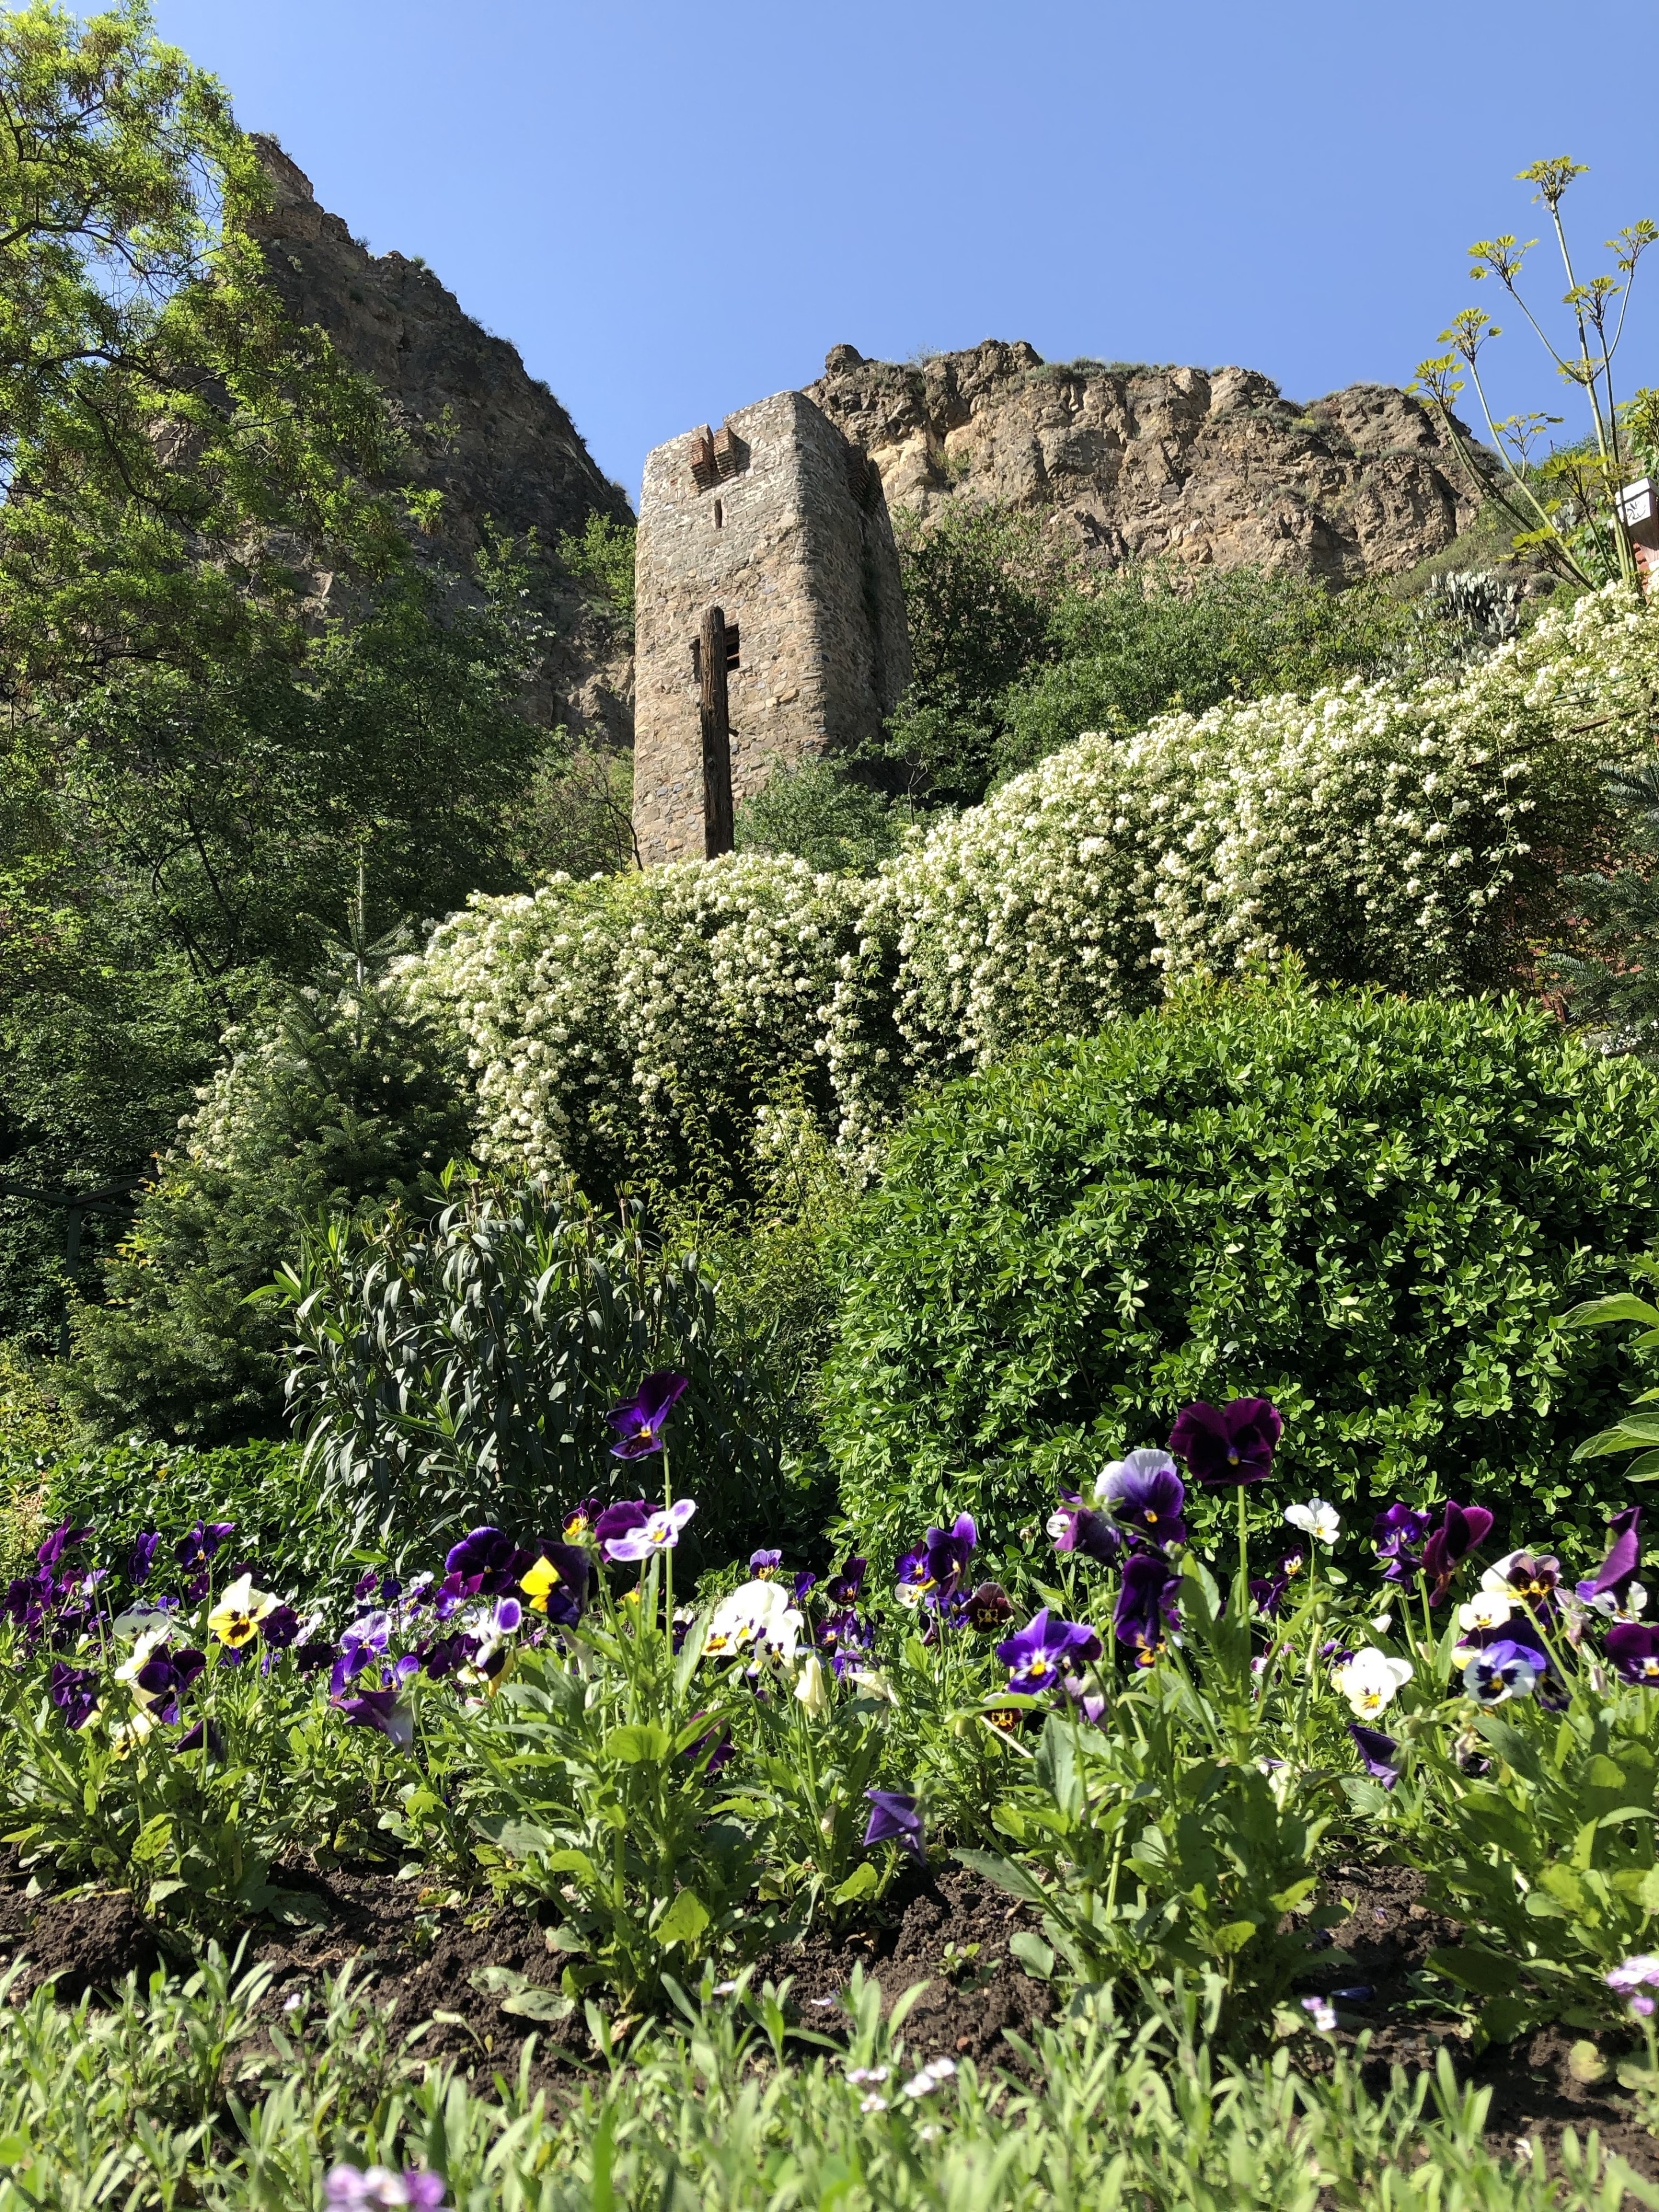 View from inside of a botanical garden located in the Georgian capital of Tbilisi. Located in a gorge located behind Tbilisi’s Old Town, this botanical garden has a number of pleasant trails and even a waterfall. Looking up, a visitor will see the remains of a structure known as the Narikala Fortress.